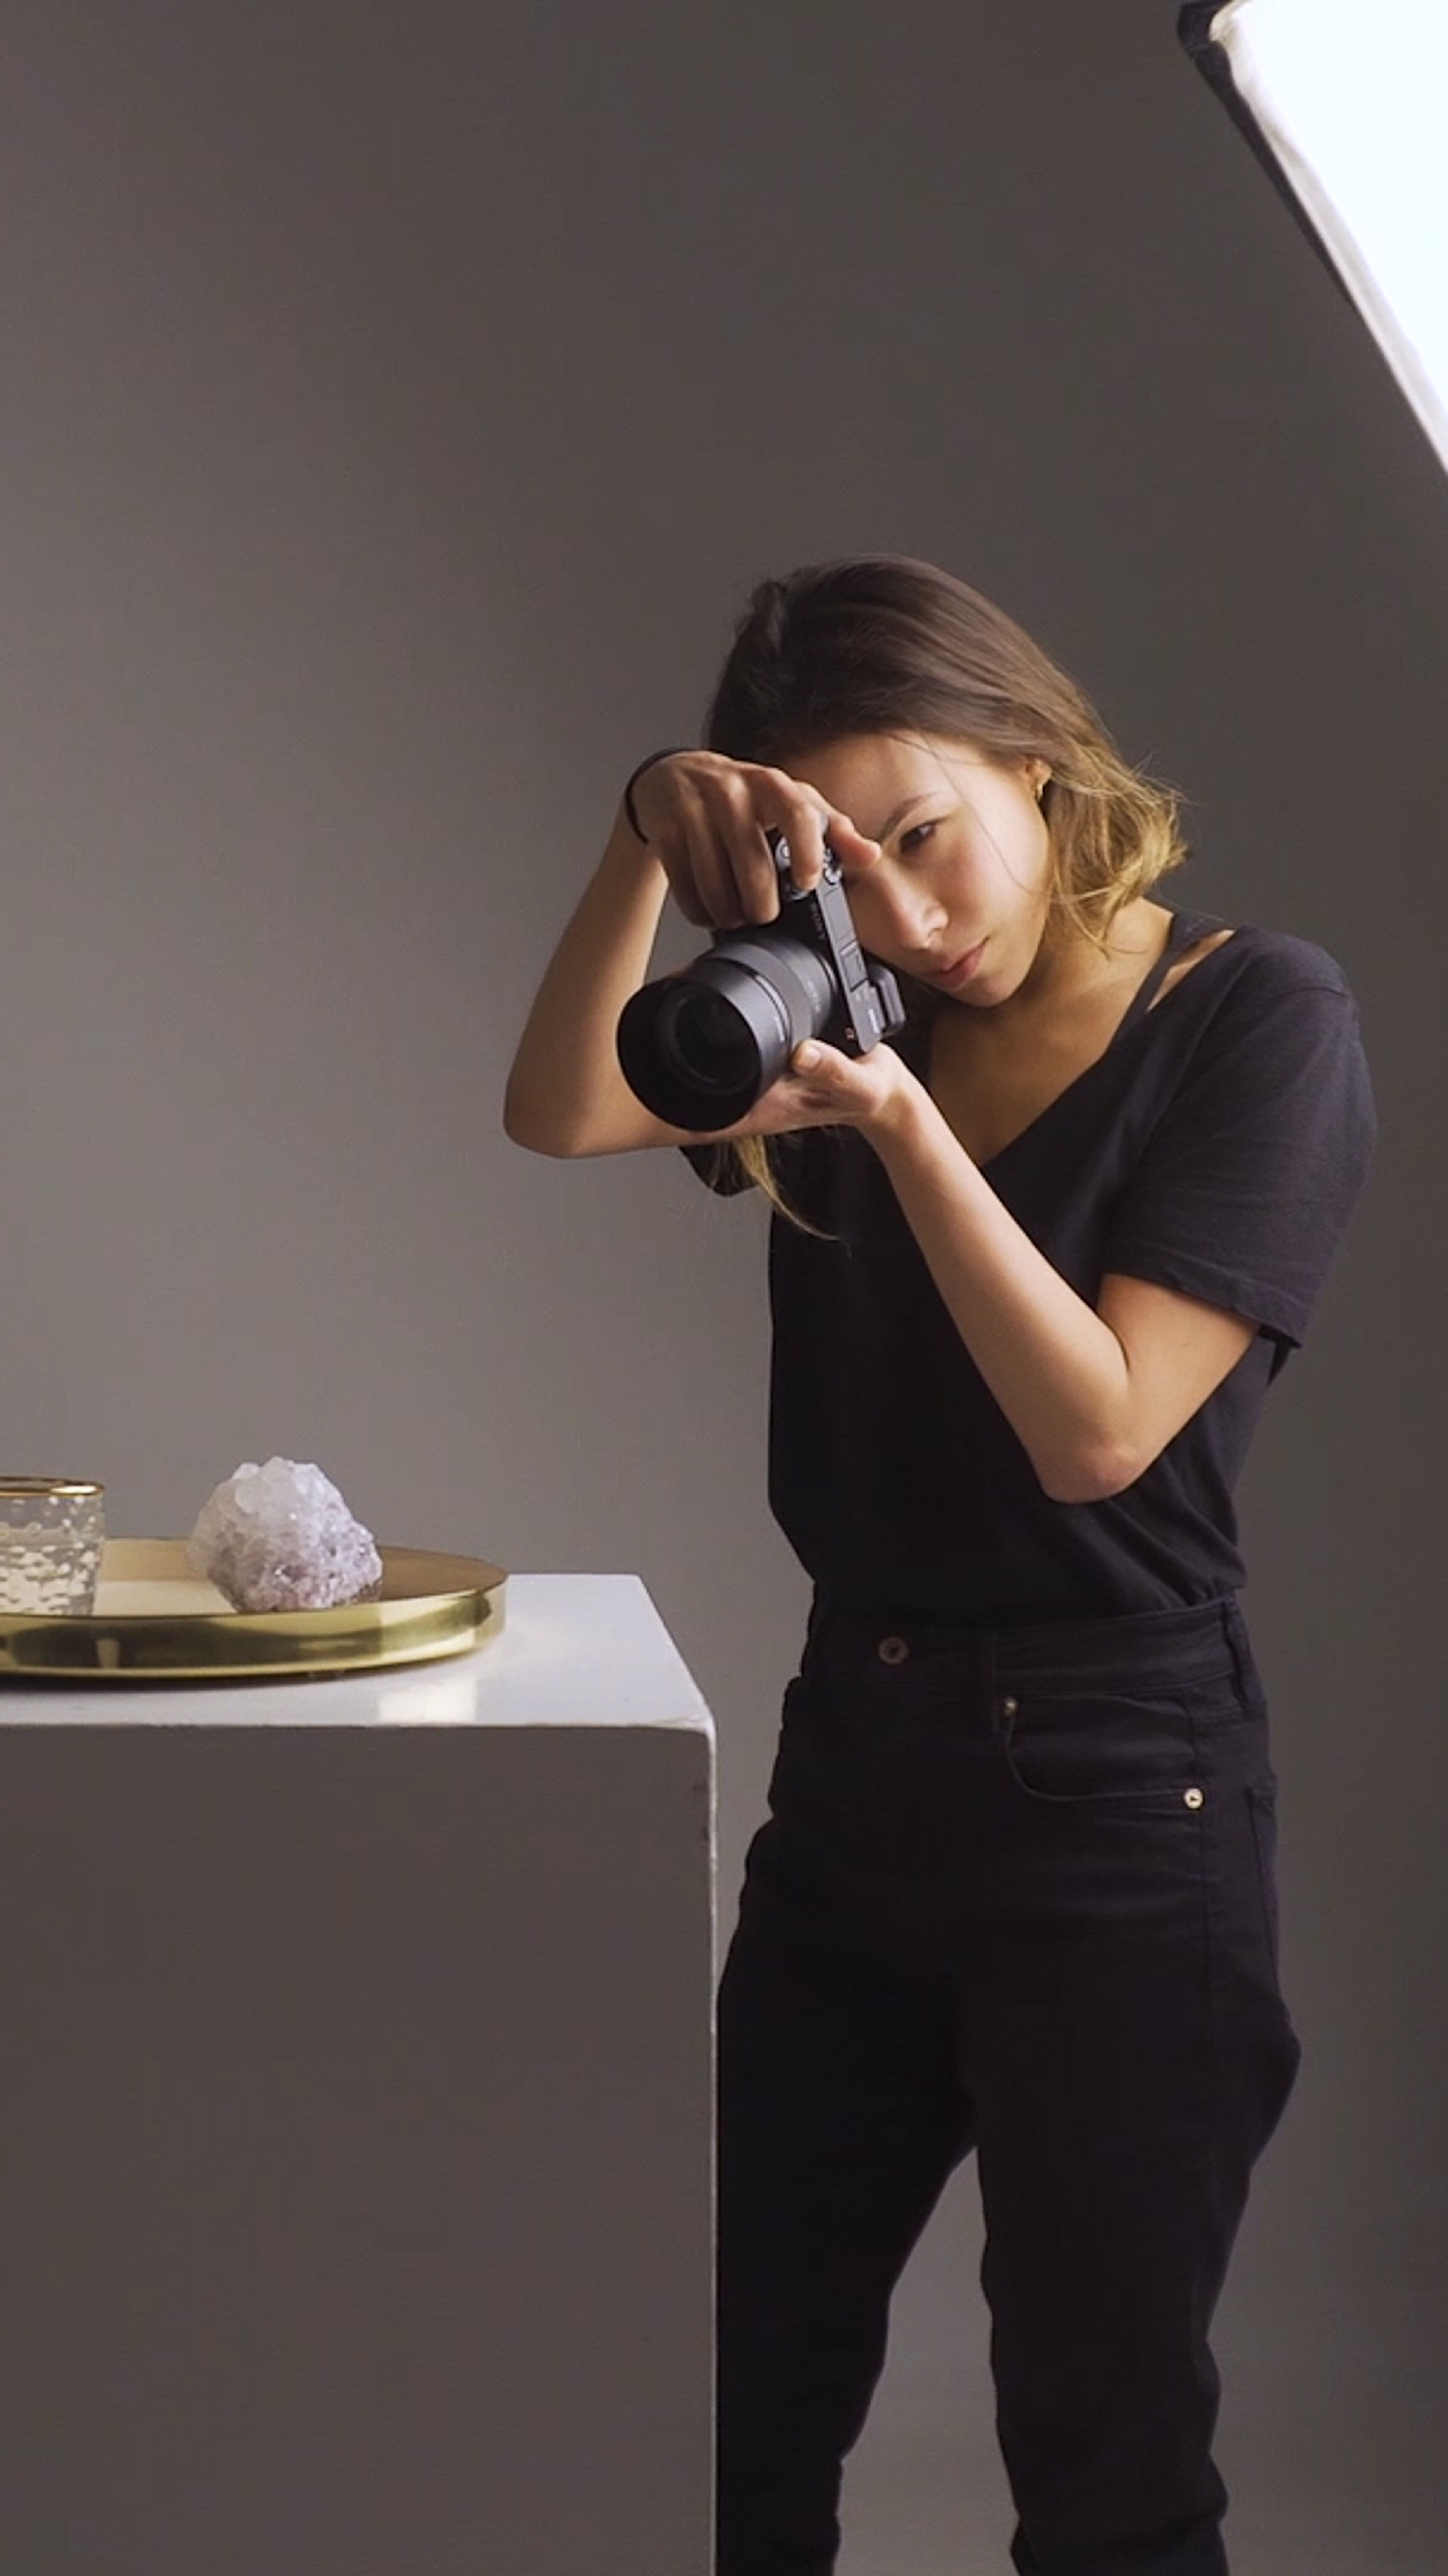 A focused photographer captures objects in a studio setup with professional lighting.